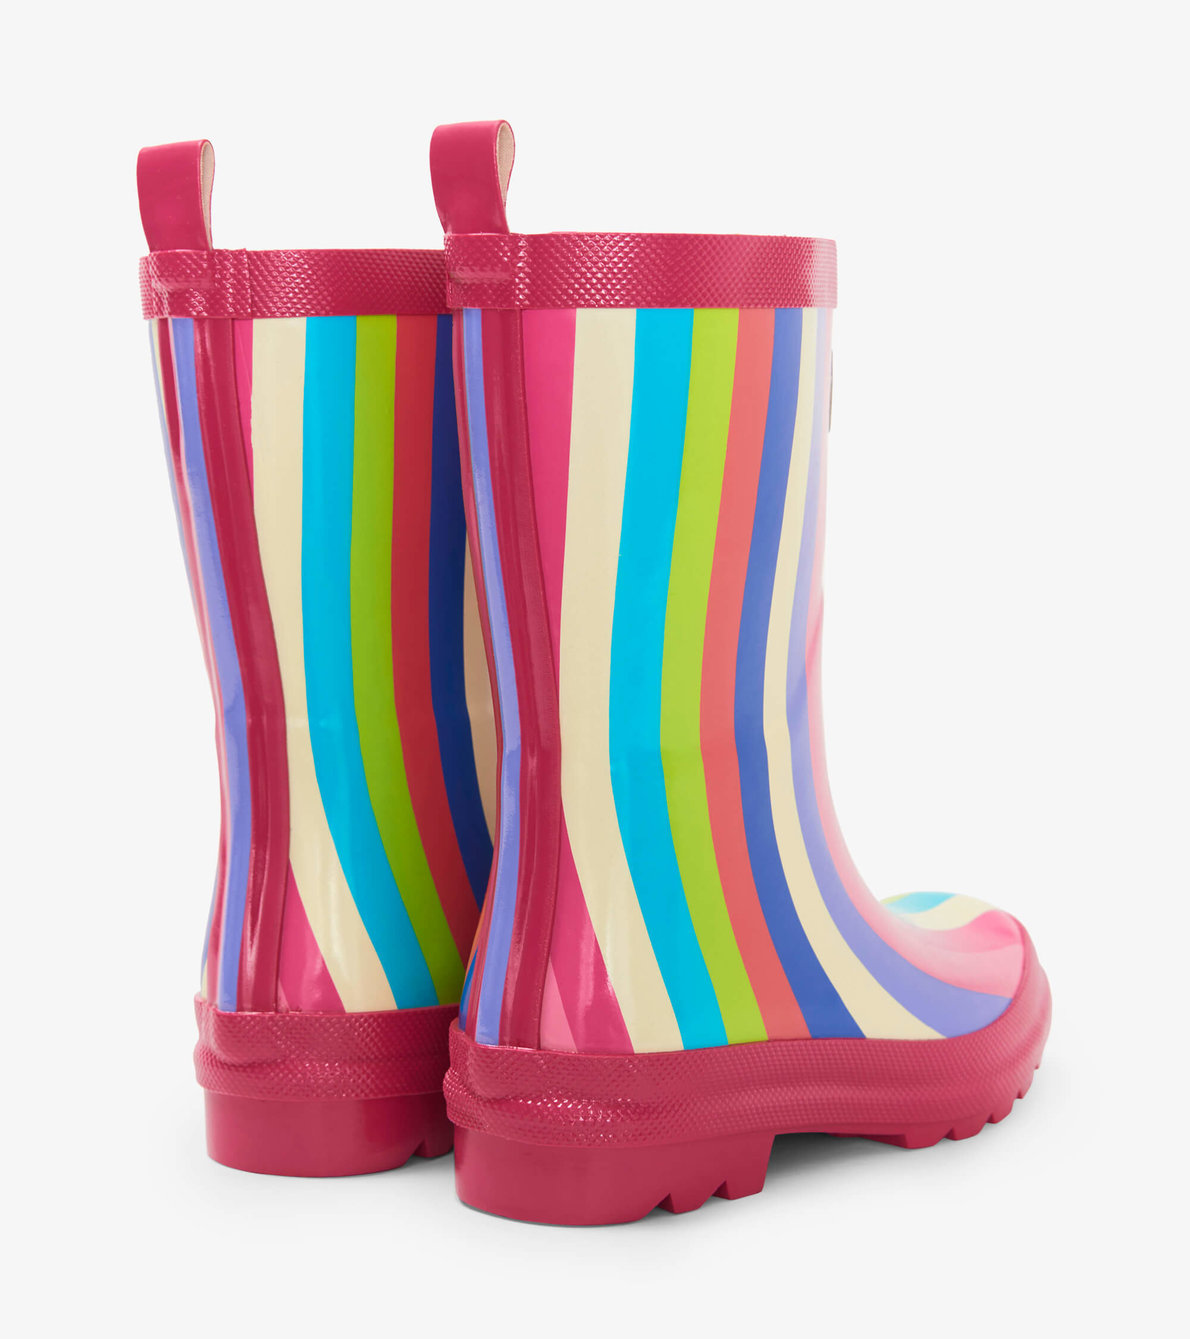 View larger image of My 1st Rain Boots - Rainbow Stripes